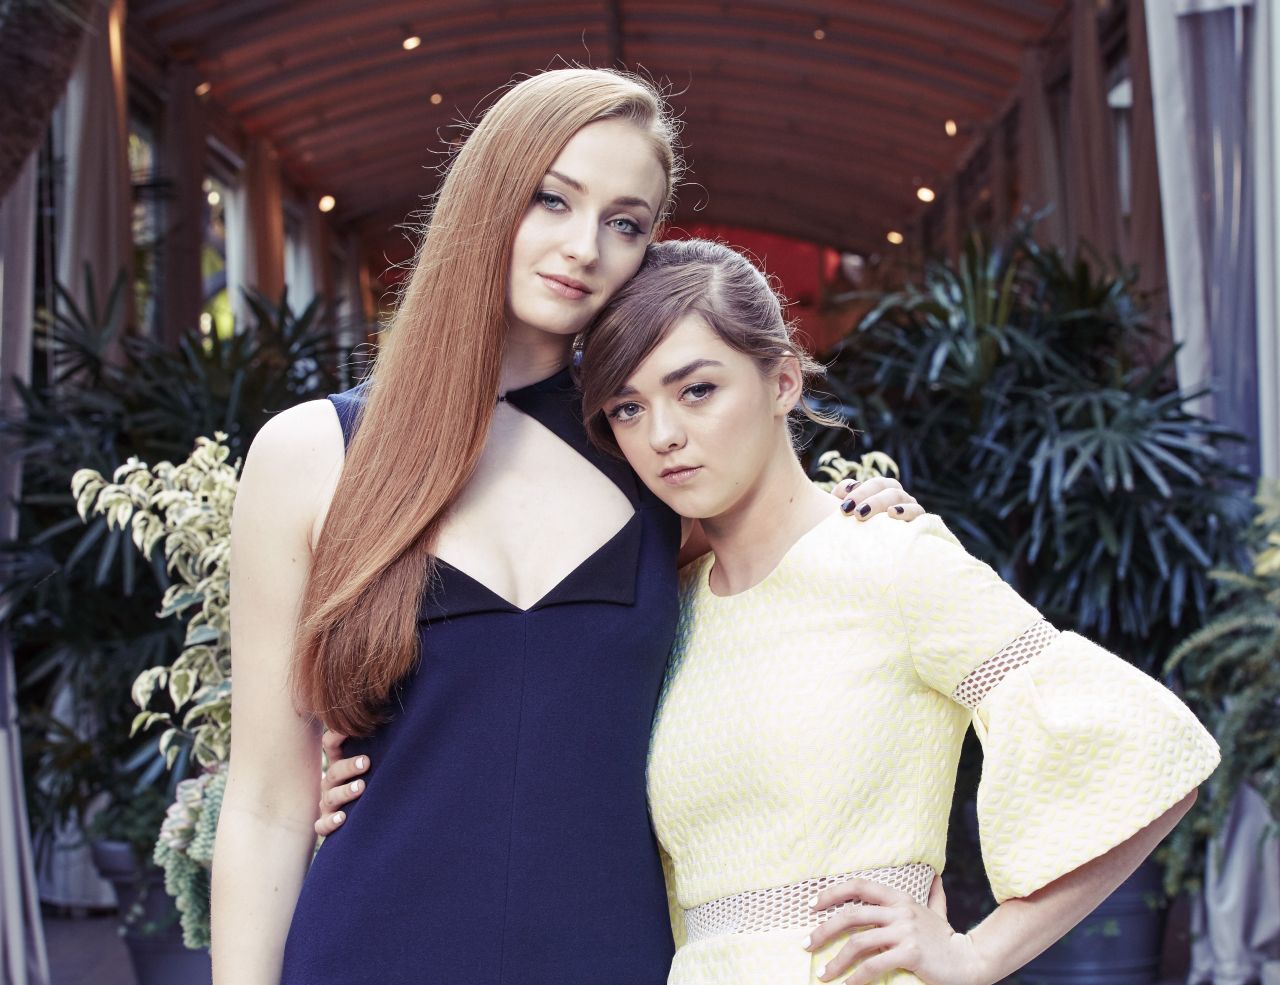 Sophie Turner And Maisie Williams The New York Times Photoshoot March